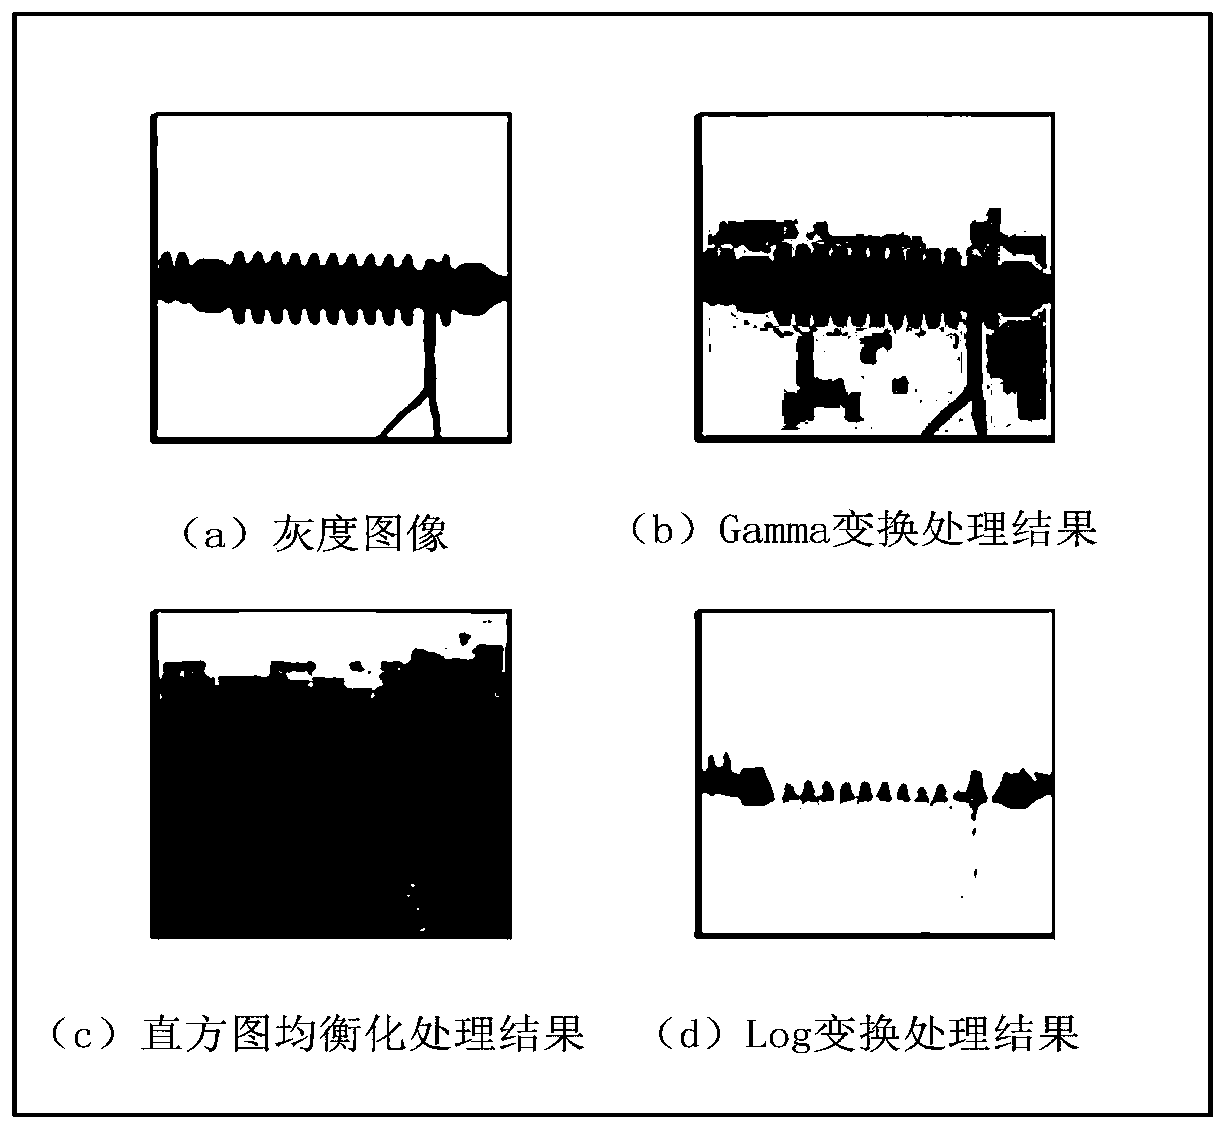 High-speed rail insulator inspection image identification method based on image library combination